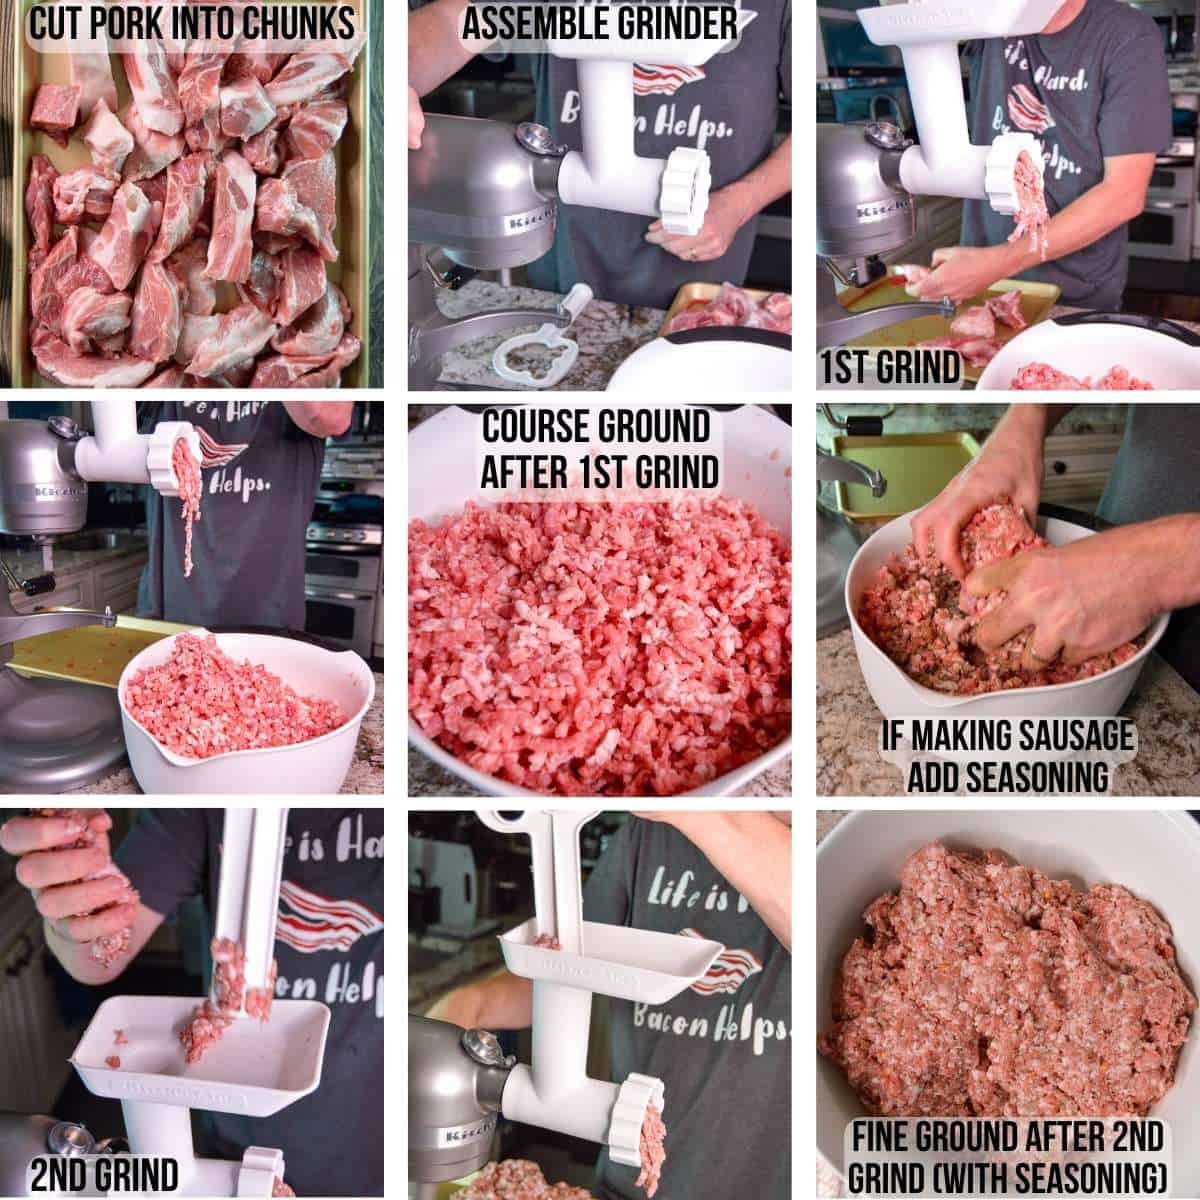 How to Grind Your Own Pork Steps Collage with adding sausage seasoning as well